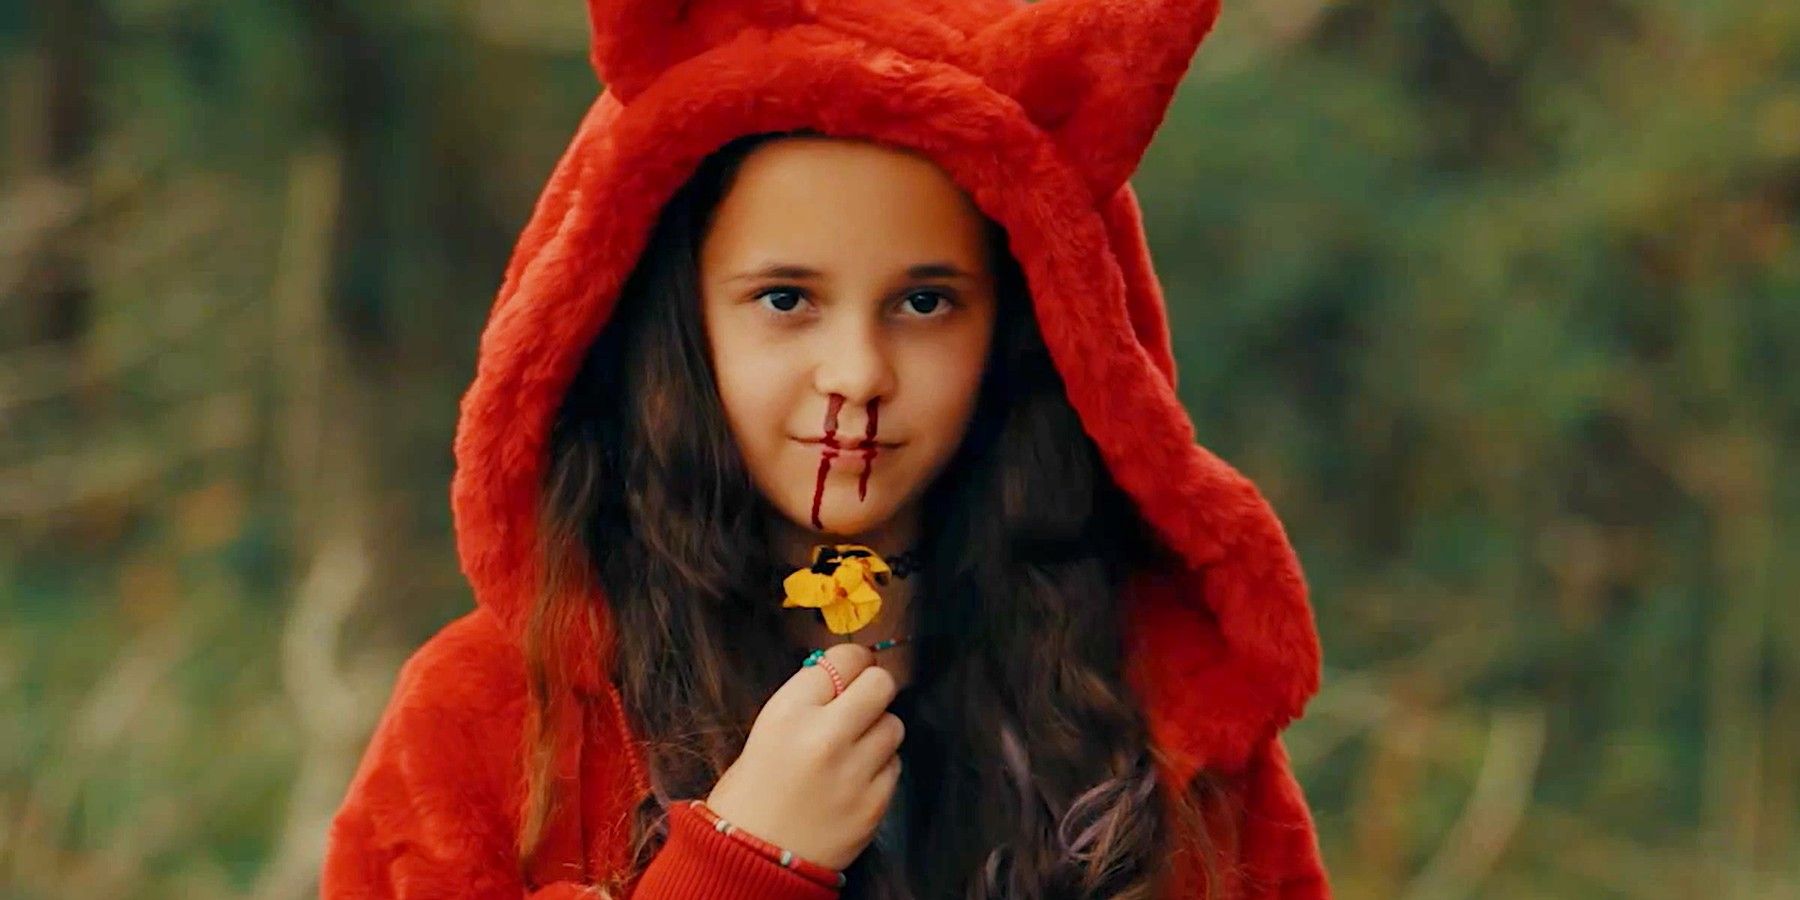 Creepy child with a bloody nose in the There's Something Wrong With the Children trailer